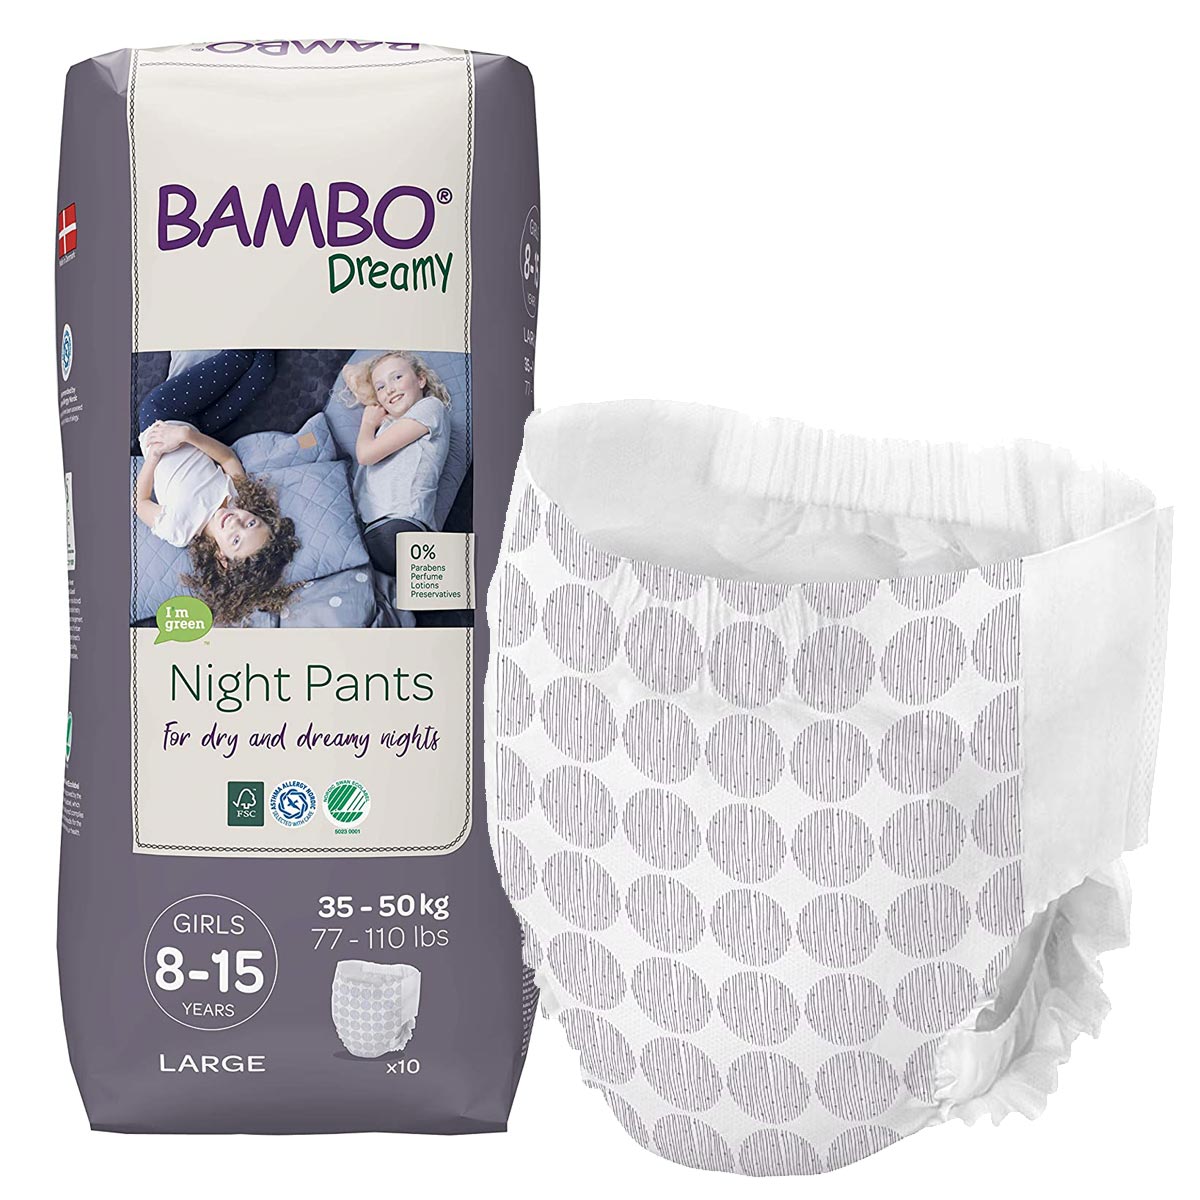 Bambo Dreamy - Night Pants Mädchen / Girl - 8 bis 15 Jahre (35-50 kg) - 10 St. Pack